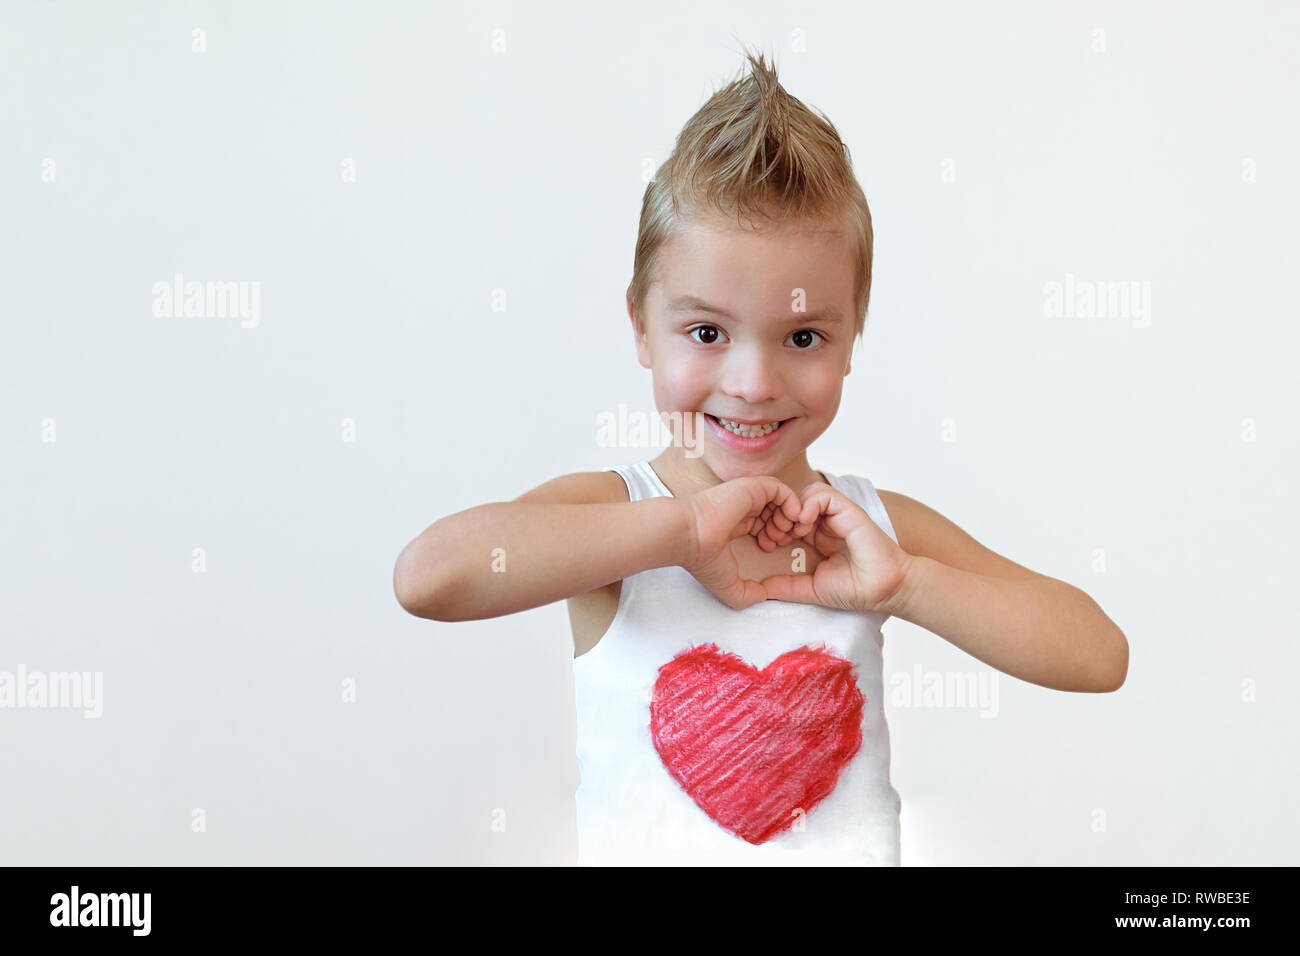 Lovely child boy smiling shows heart sign. Portrait kid blond 6 year with smile making hands gesture love. Studio isolated white background. Stock Photo